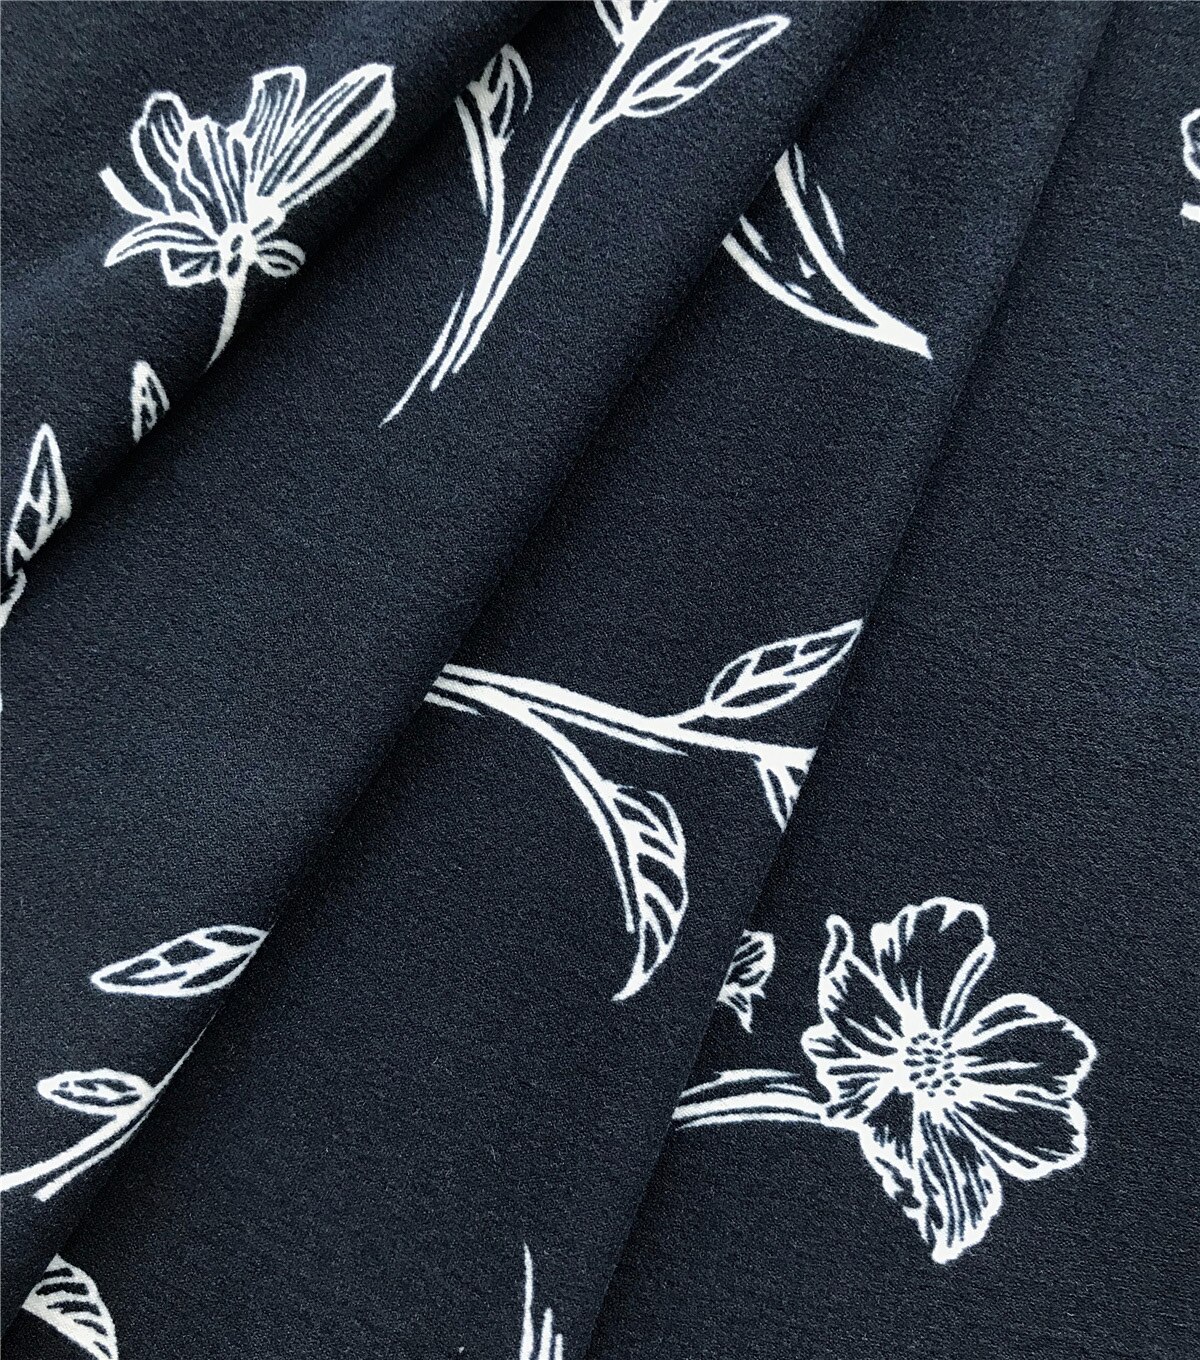 Ember White Illustrated Floral on Navy Knit Fabric | JOANN